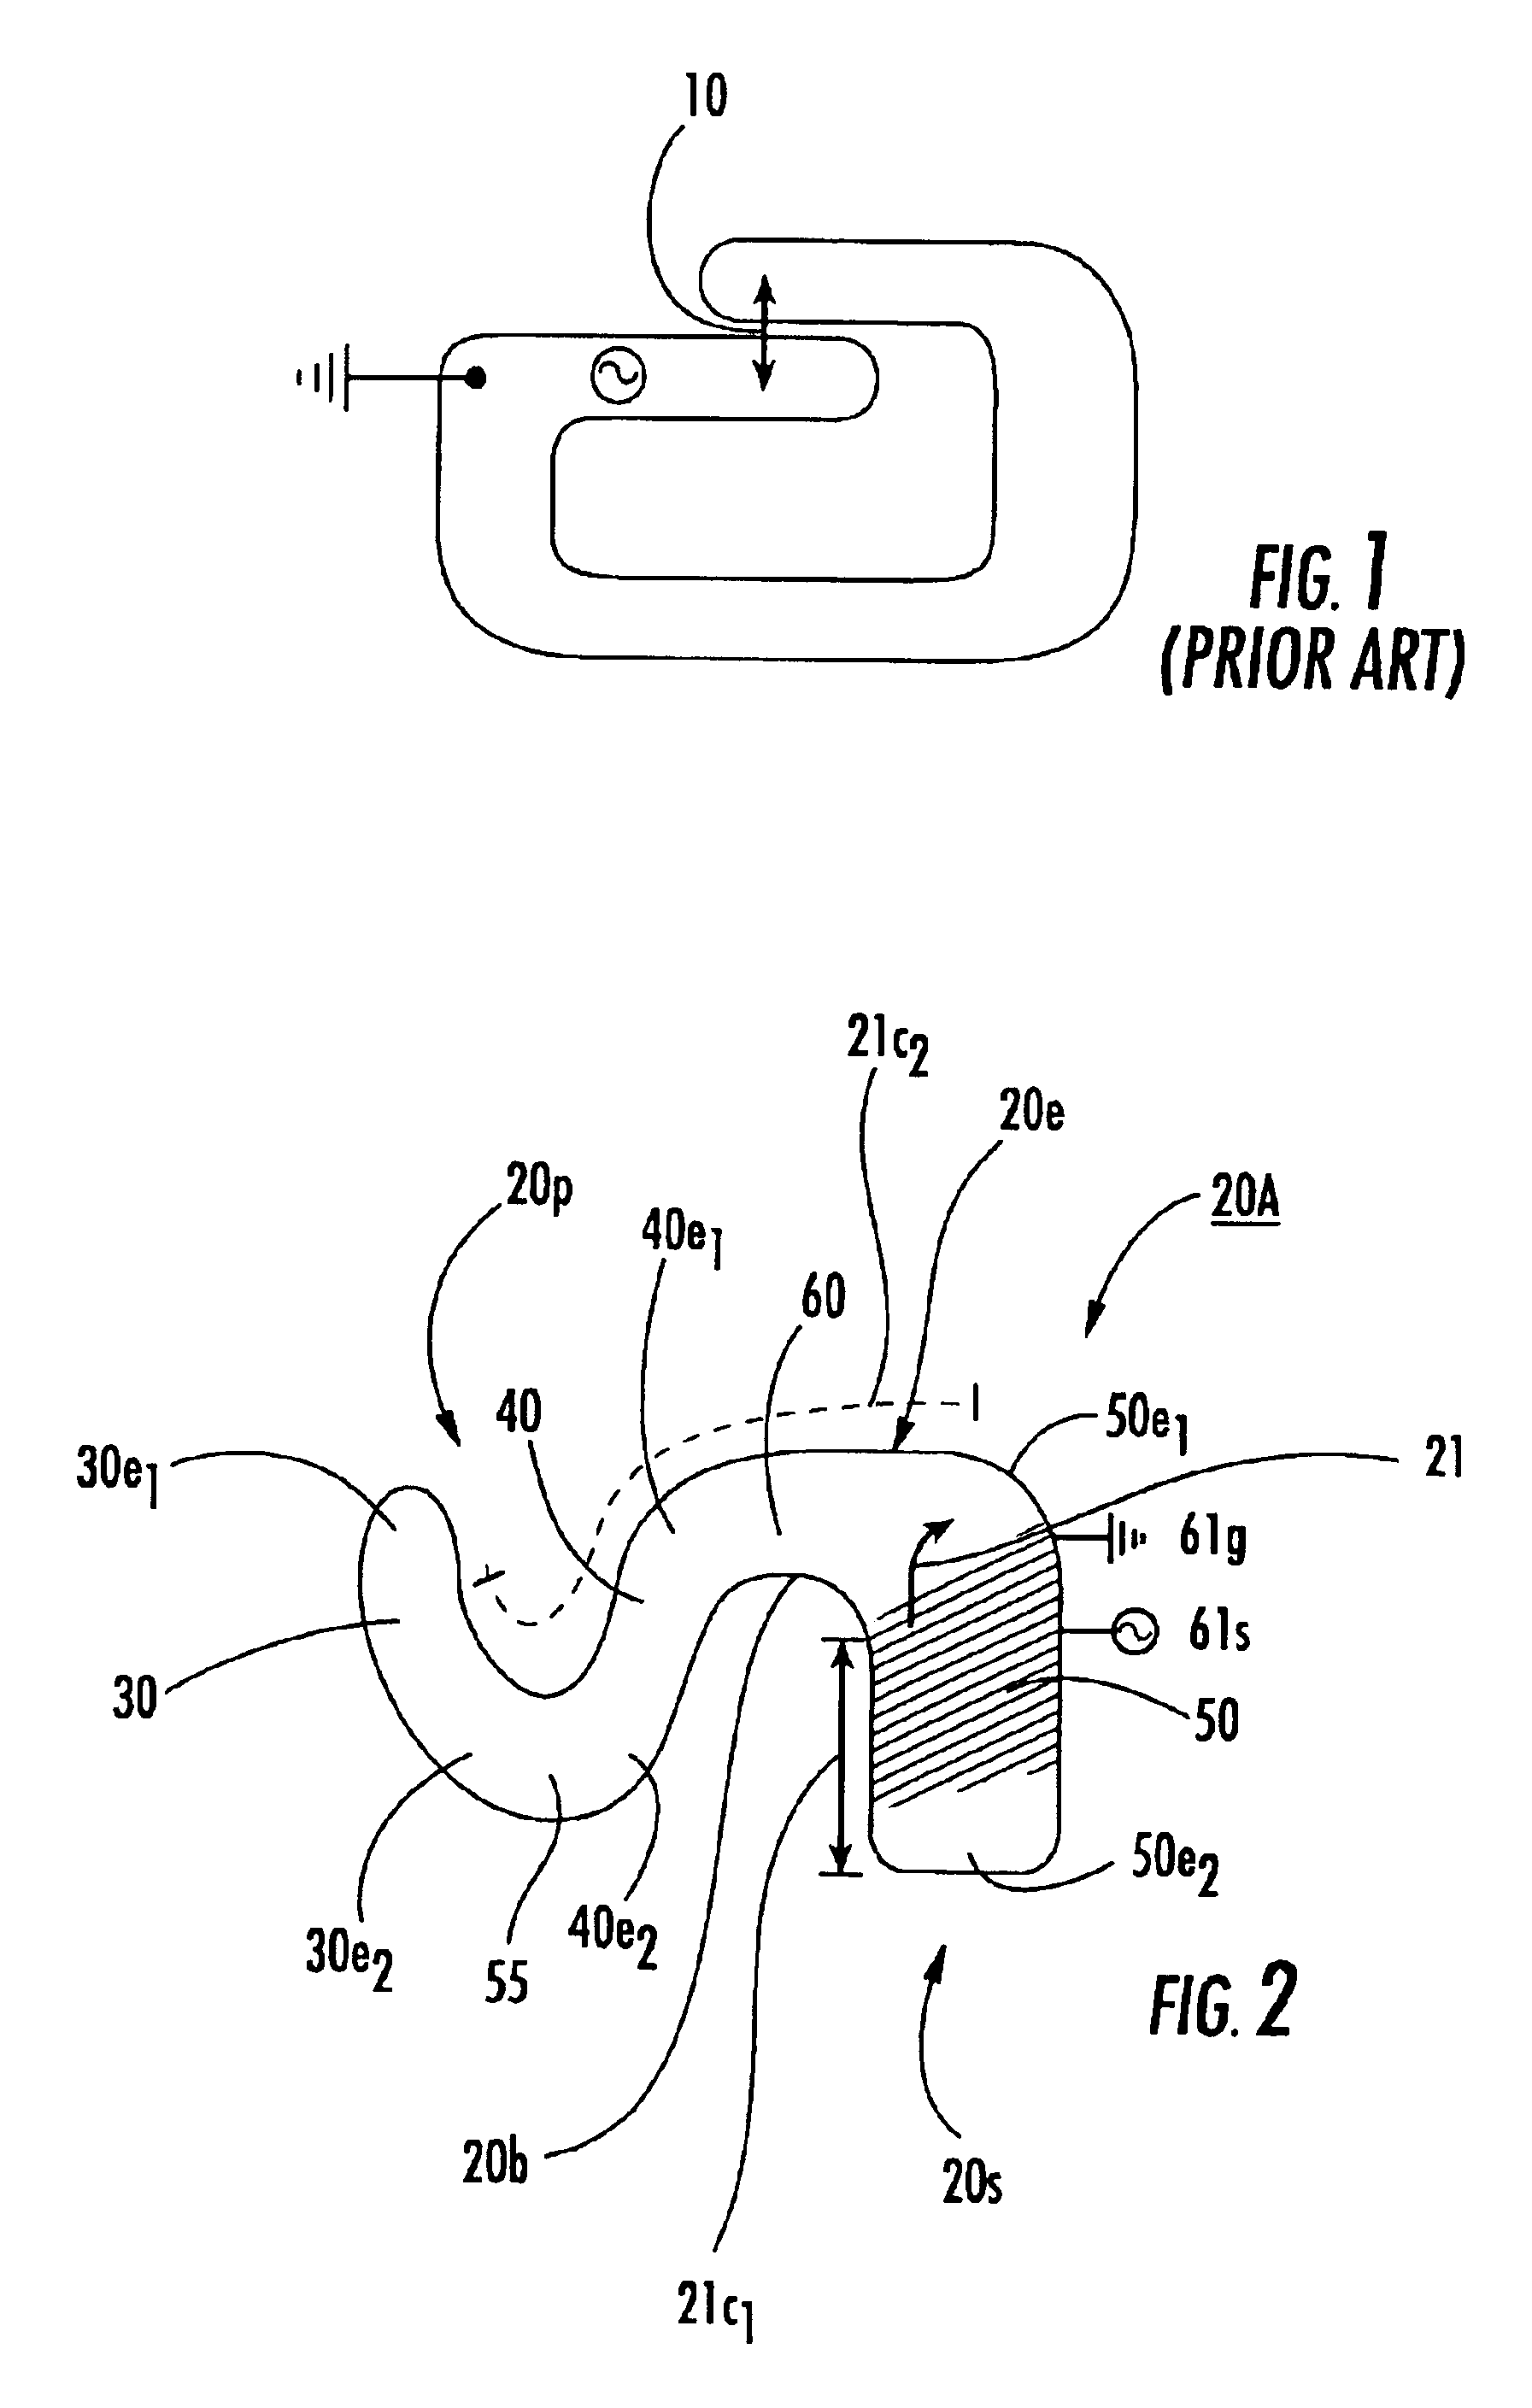 Multi-branch planar antennas having multiple resonant frequency bands and wireless terminals incorporating the same